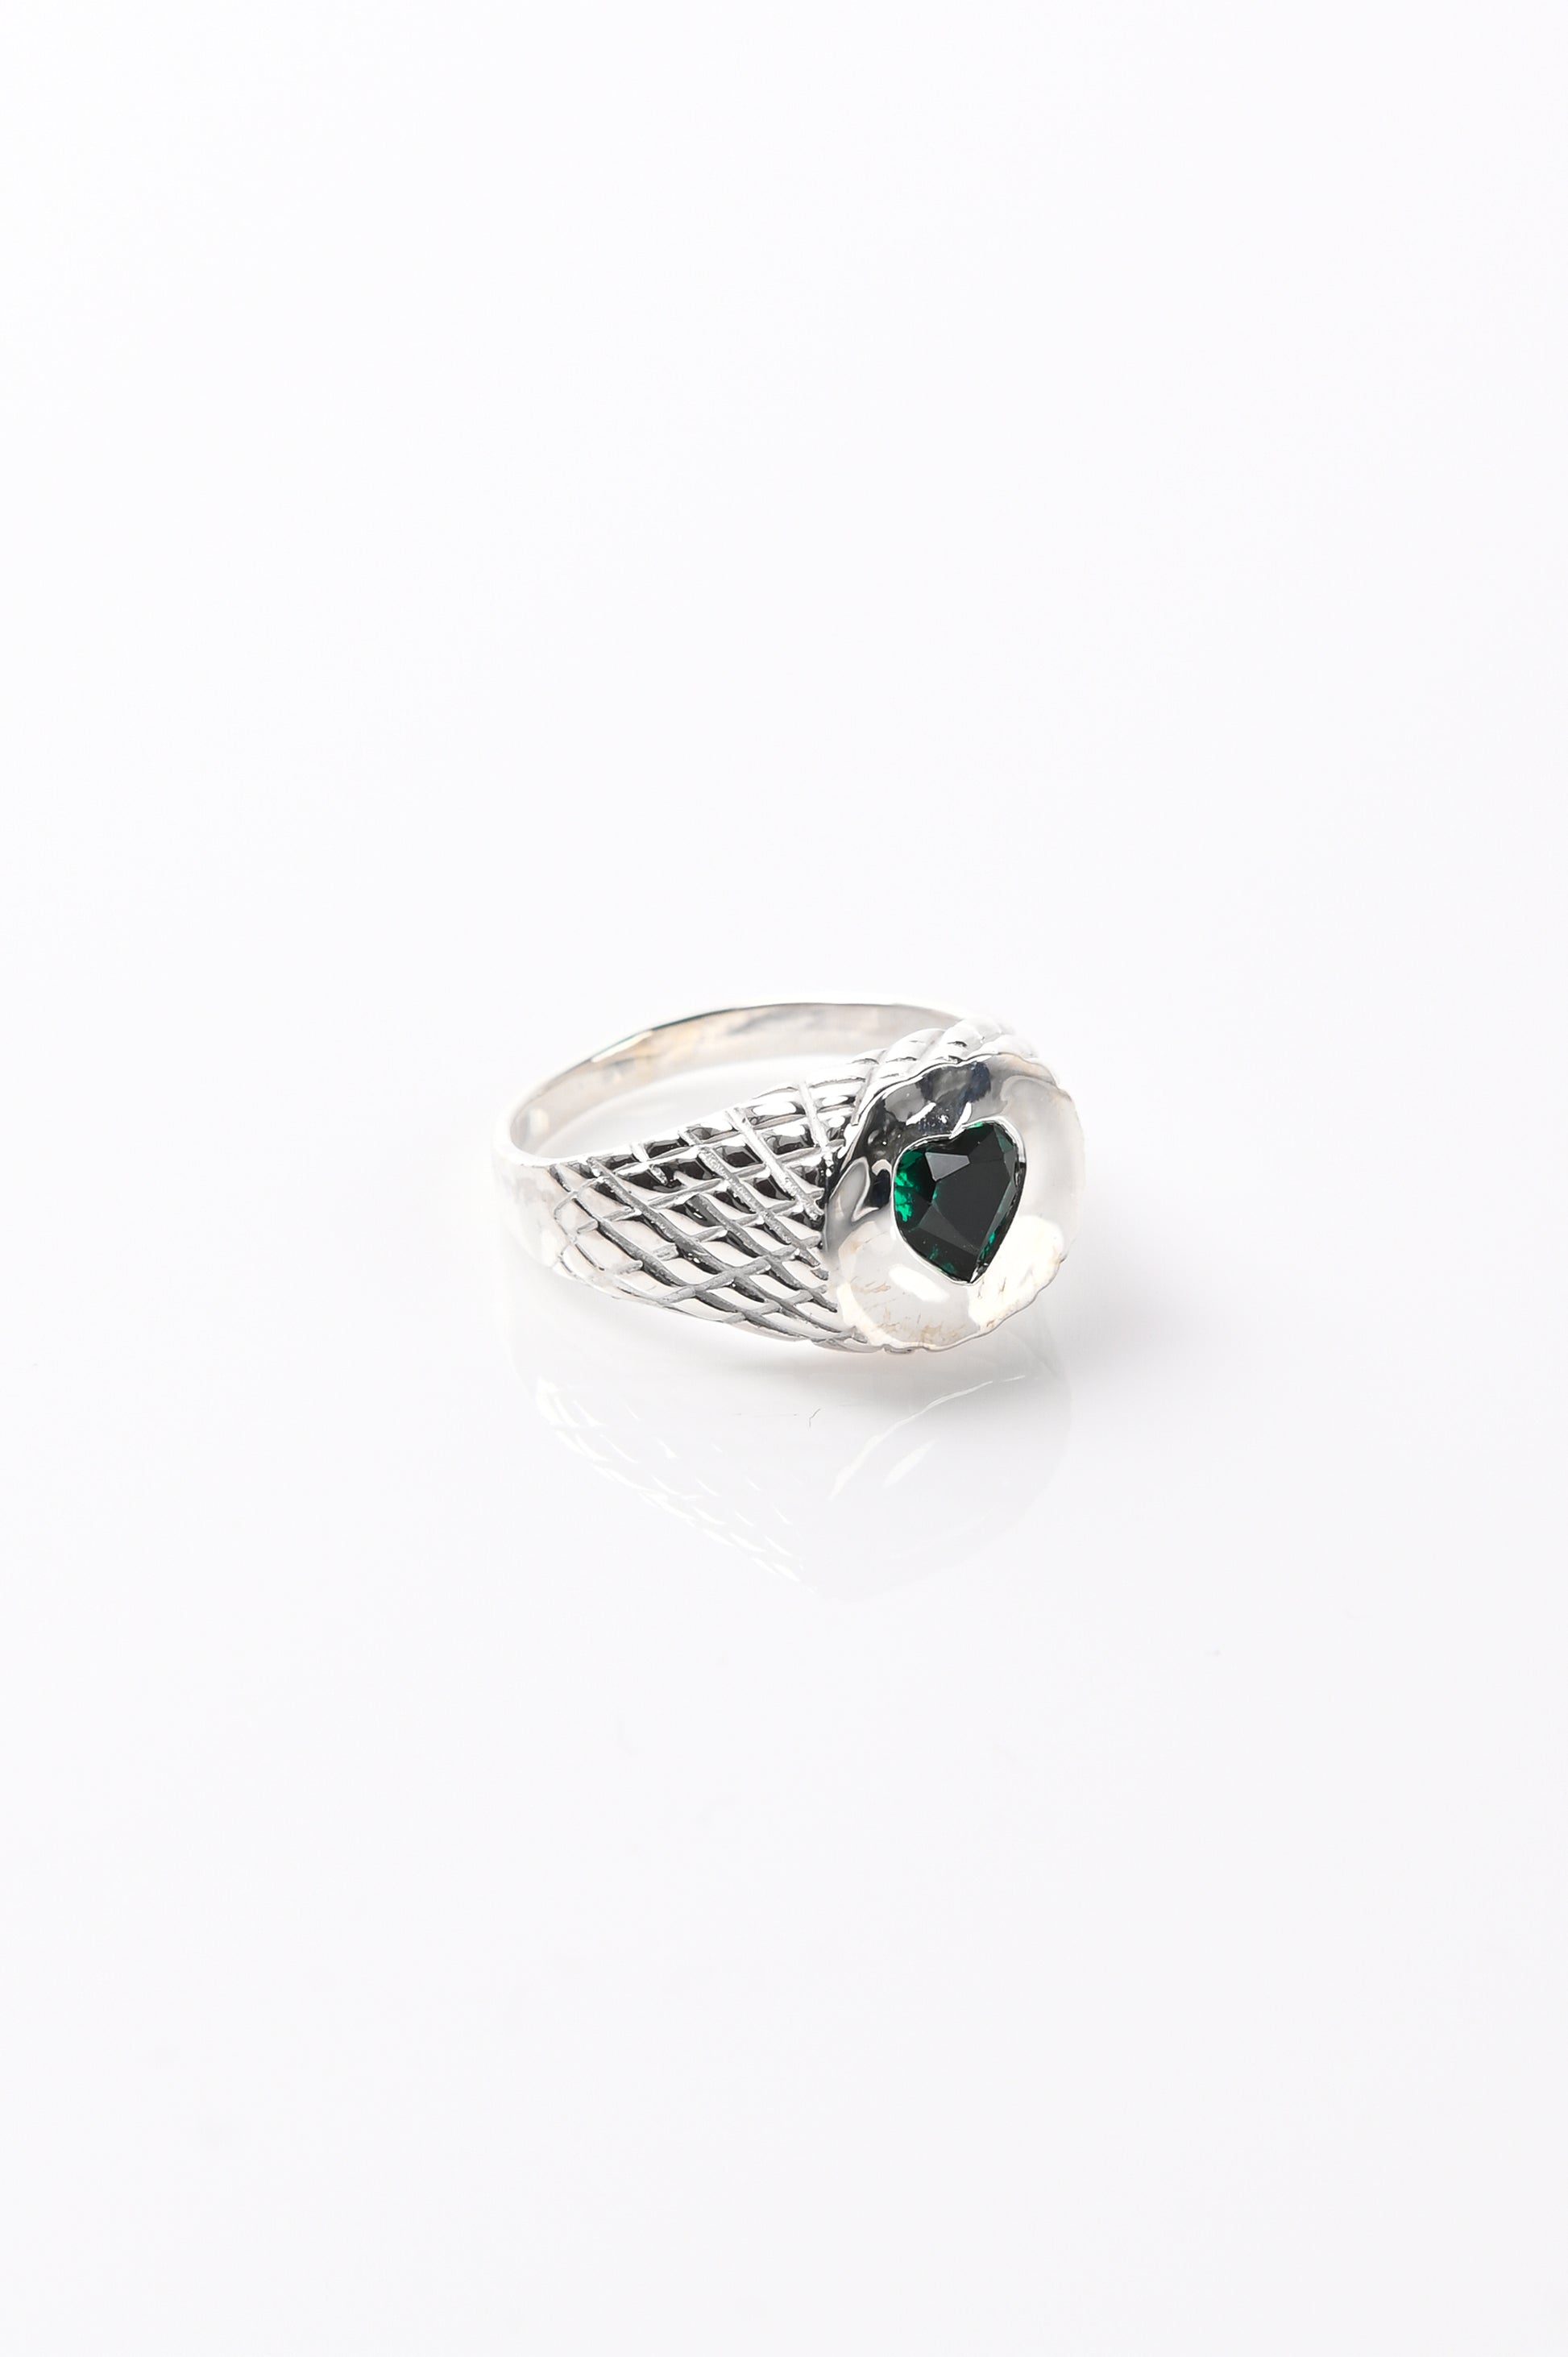 27mollys 'Heart' Ring With Emerald